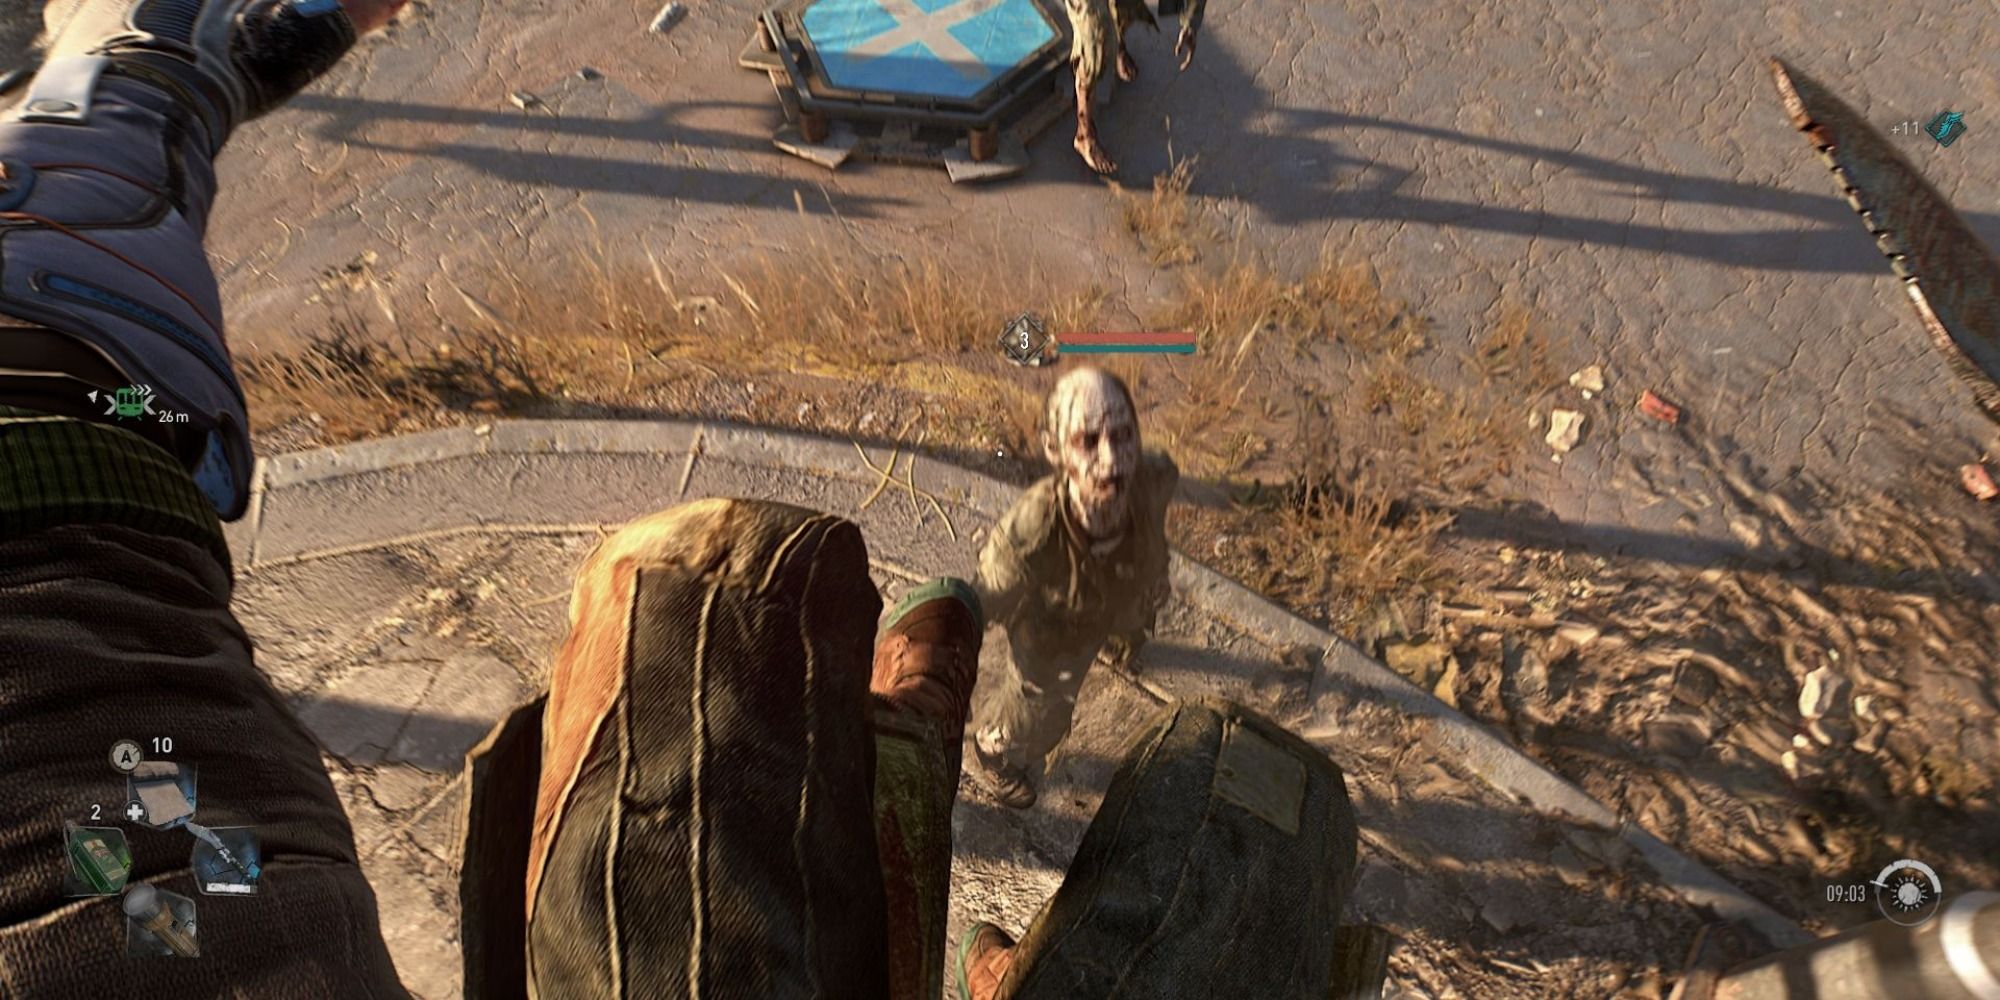 The player jumping over a zombie.